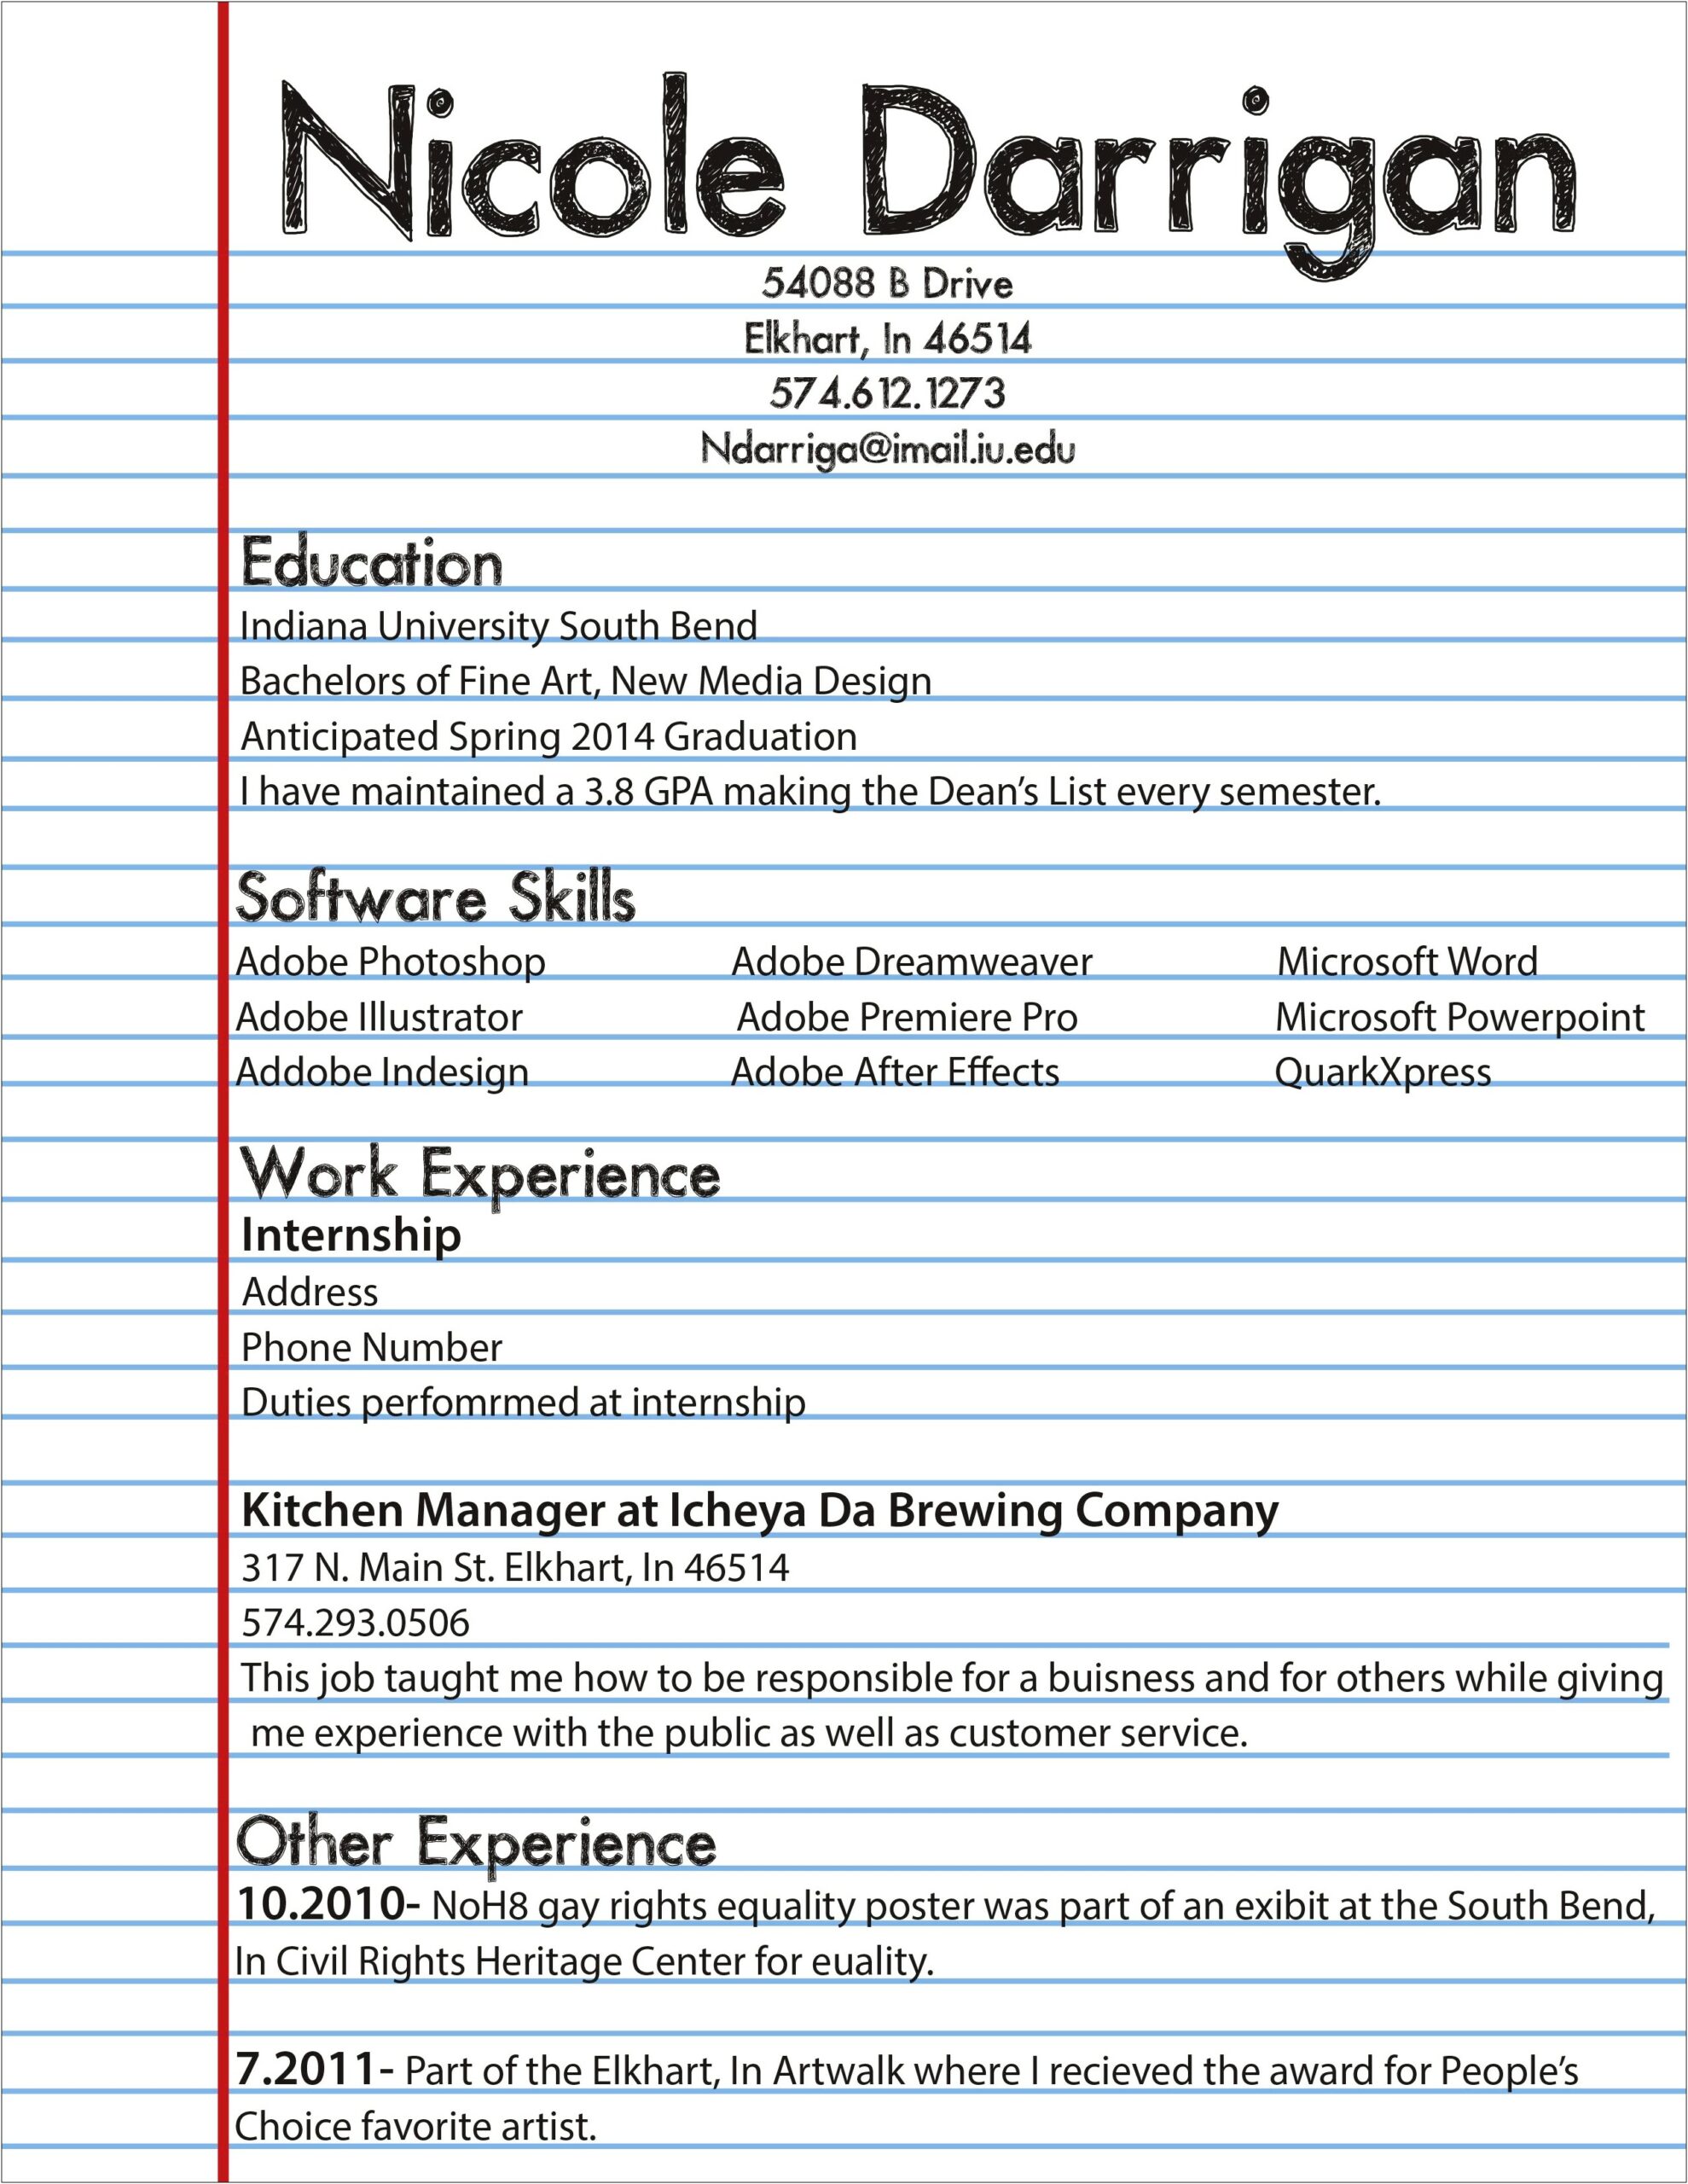 List Education Or Experience First On Resume